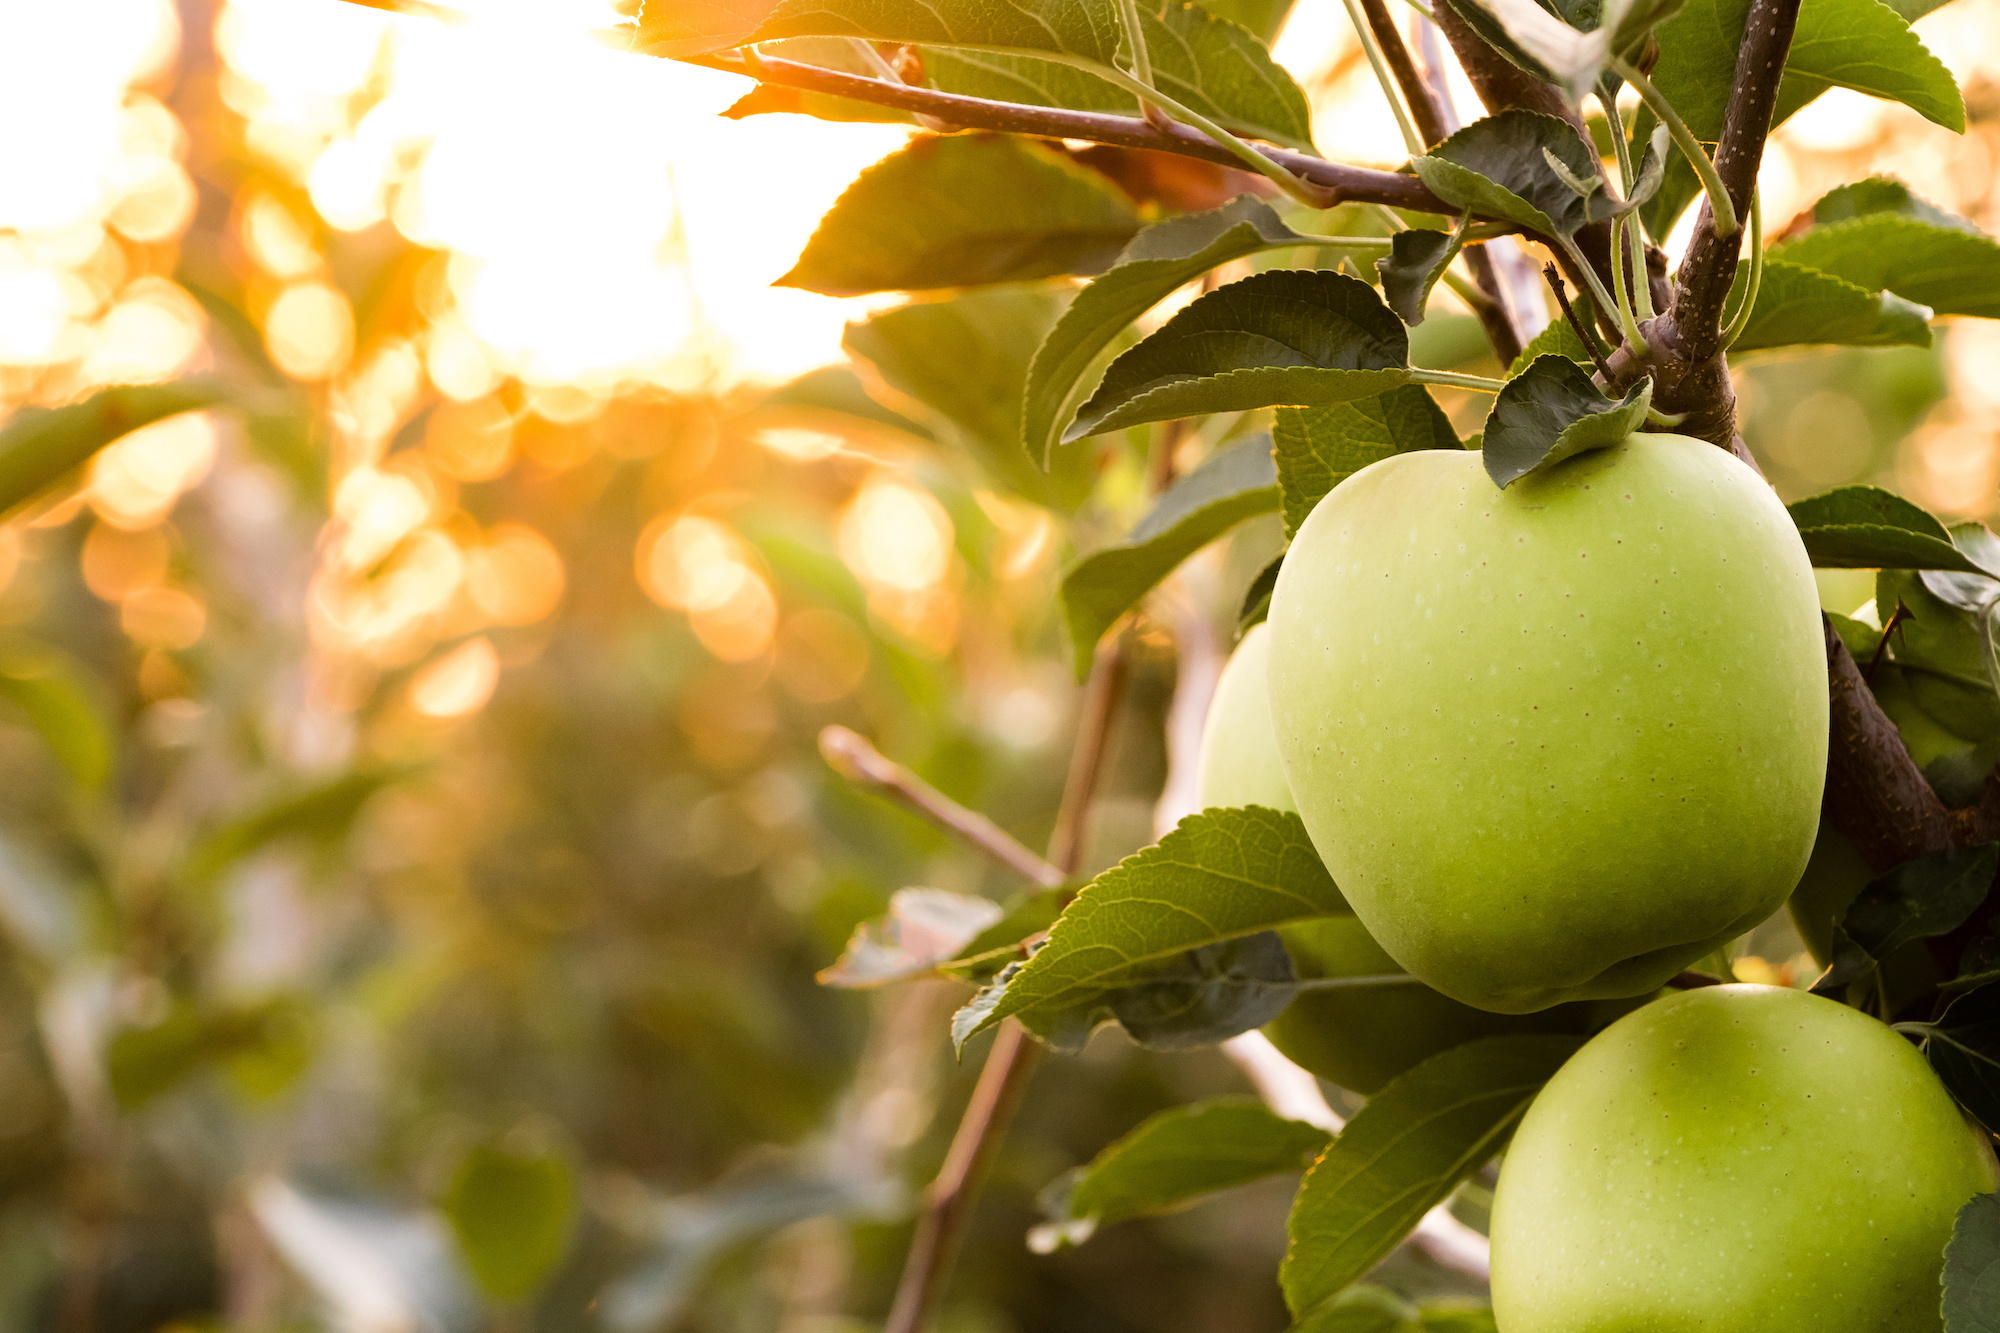 Popular varieties like Golden Delicious can be made resistant to fire blight with genetic scissors. (Image: Adobe Stock)